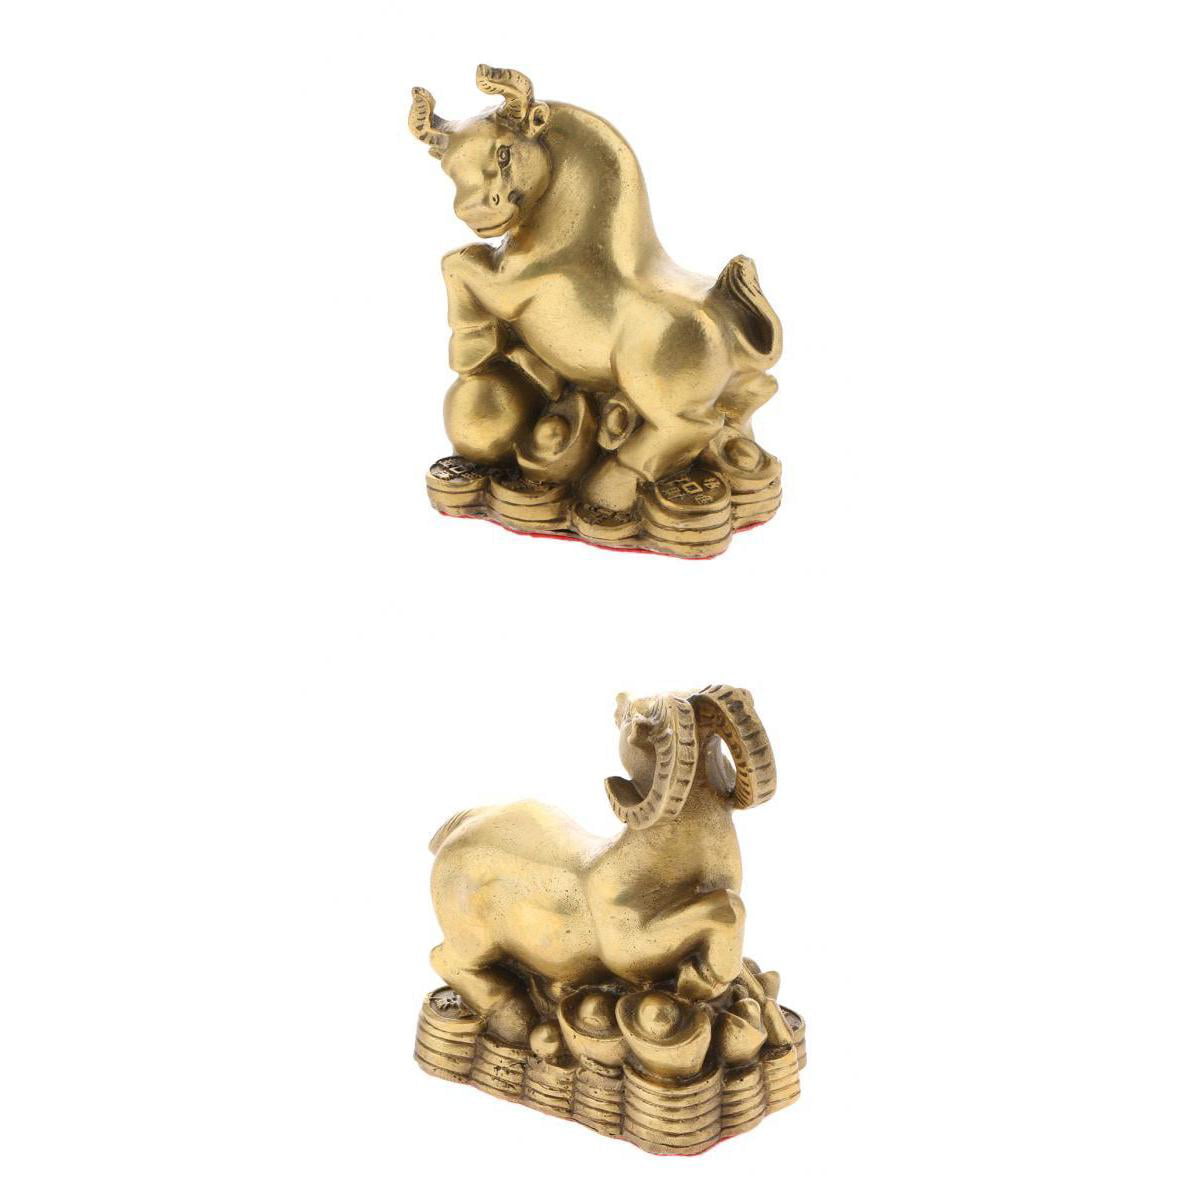 Fengshui Zodiac Animal Sculpture Chinese 12 Shengxiao Ornament New Year Gift 